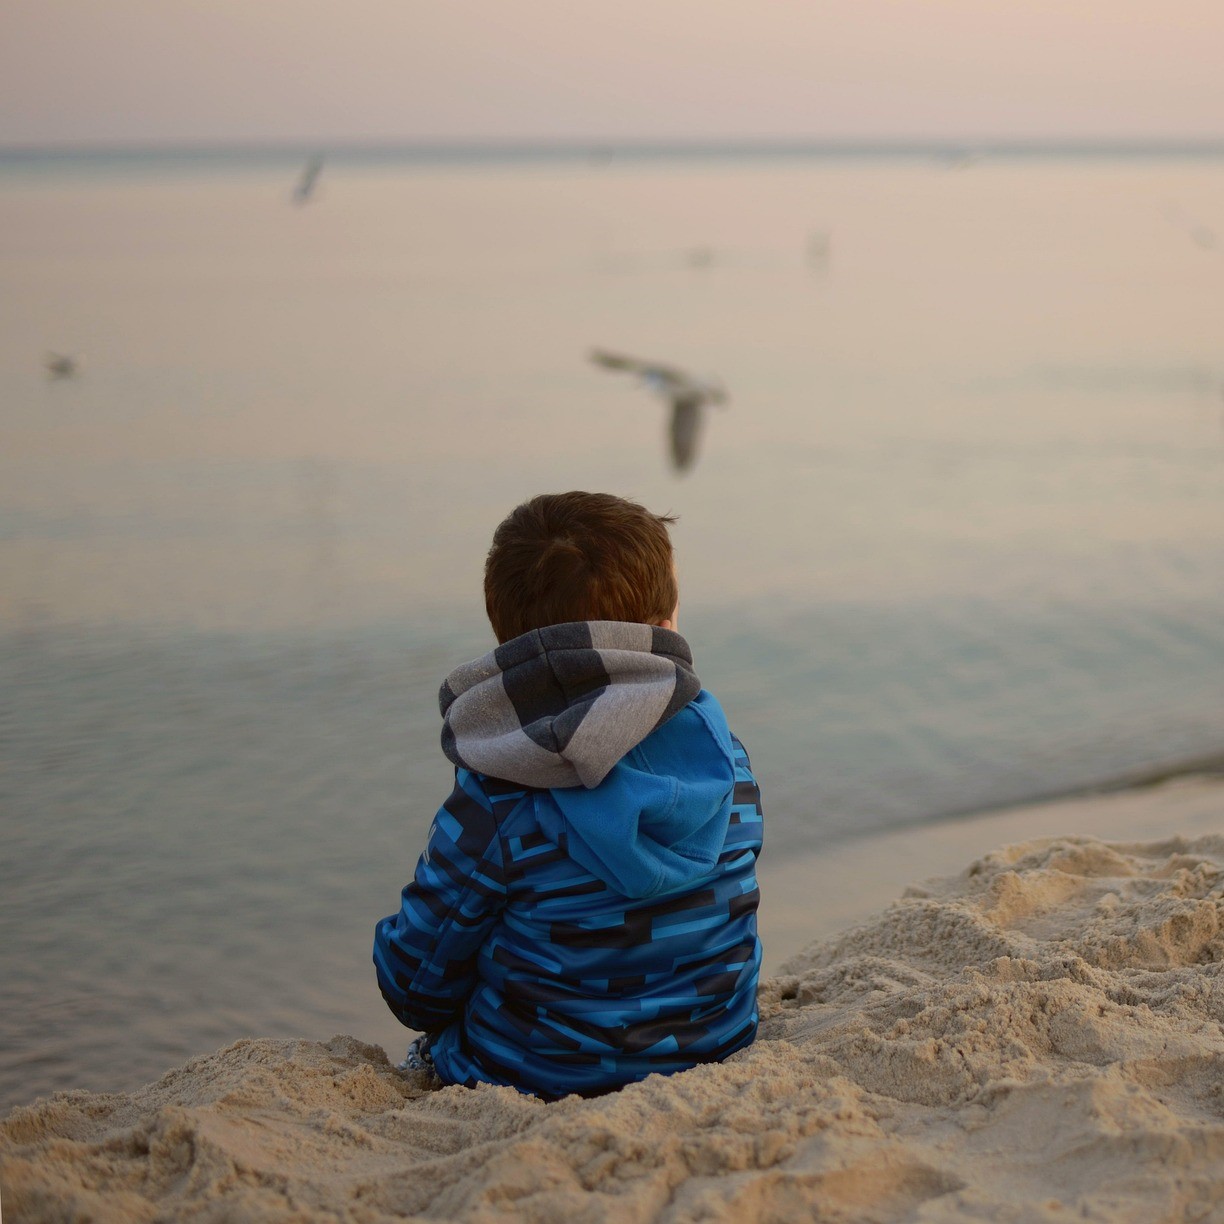 Photo of young child sitting on a sandy beach, facing away from the camera and towards the sea, where birds are flying over the water